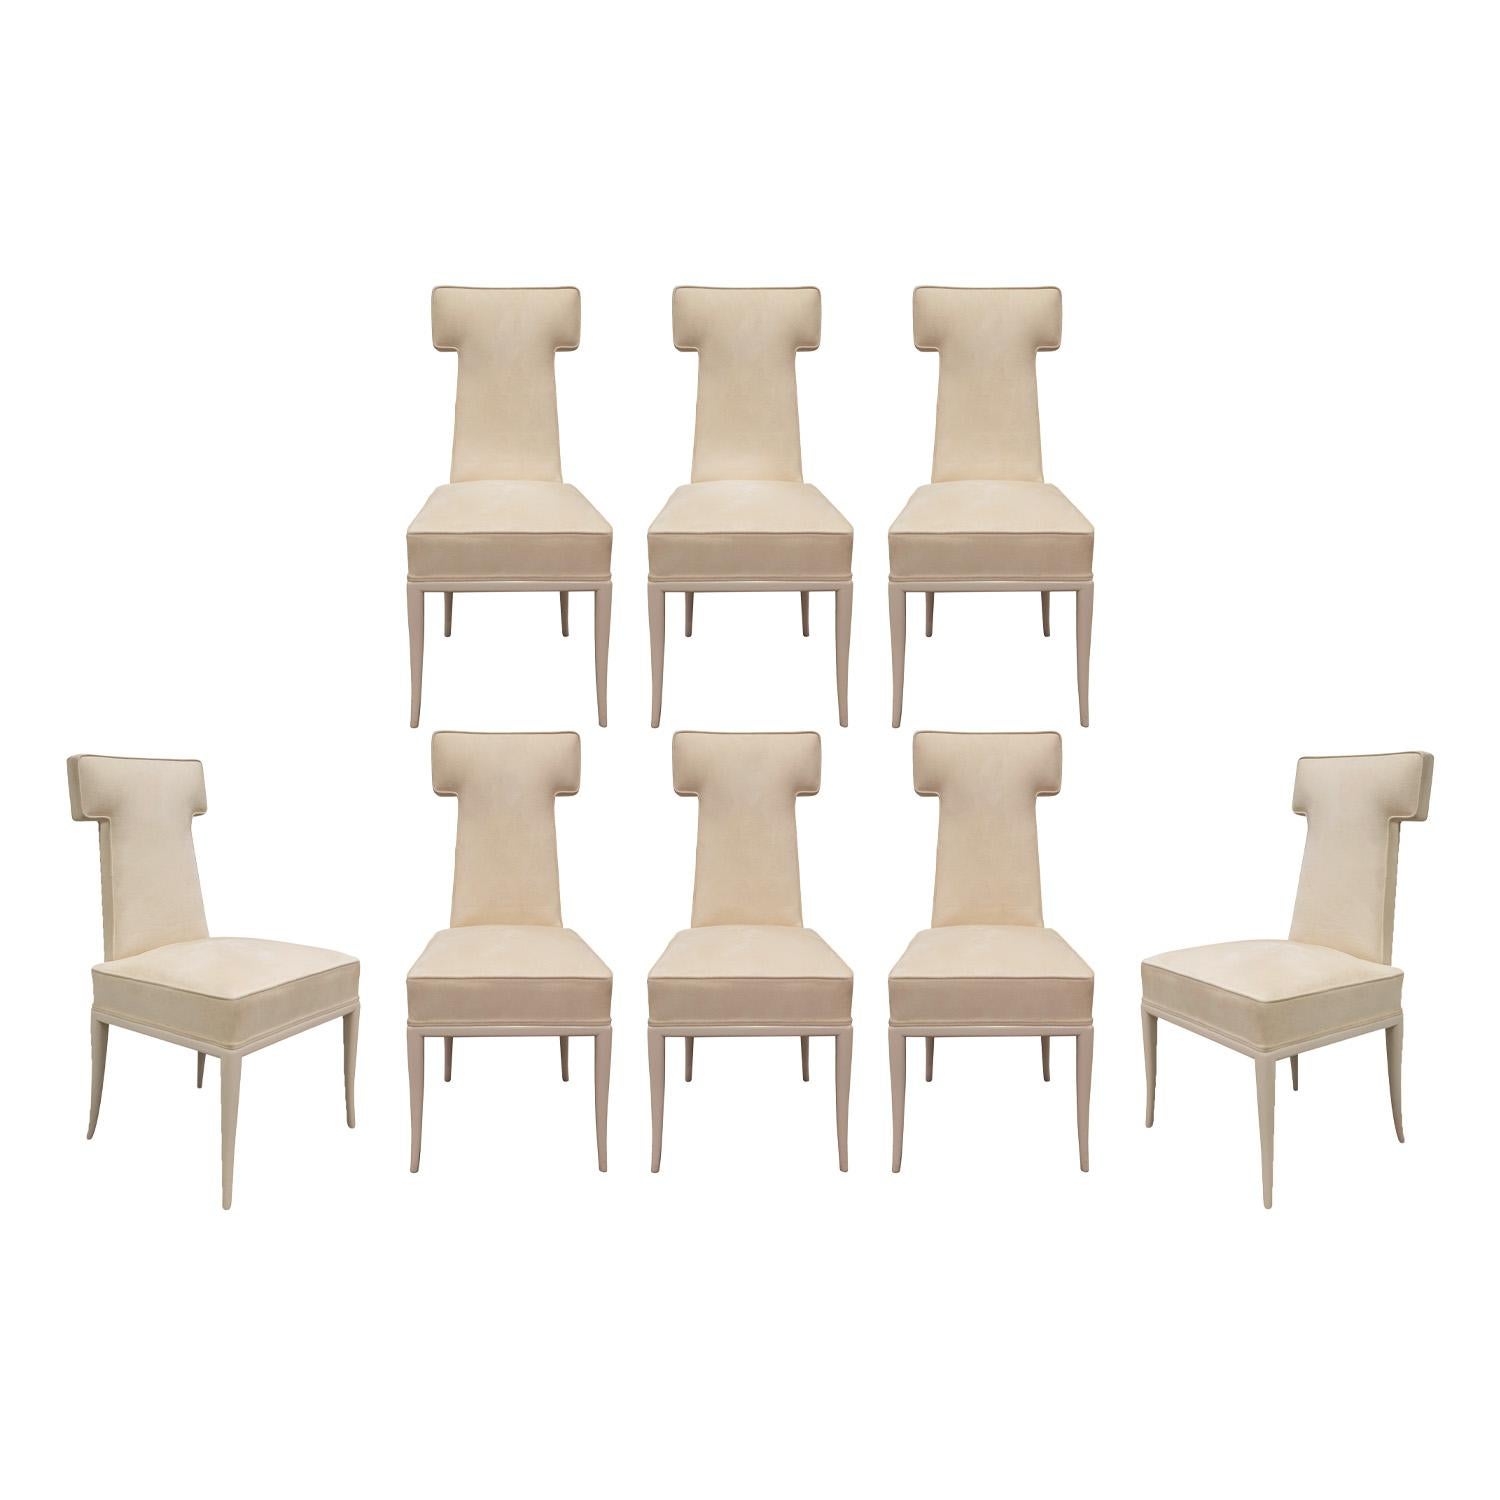 Rare and exceptional set of 8 dining chairs model 314 with base in ivory lacquered mahogany with upholstered seats and backs in cream ultrasuede by Tommi Parzinger for Parzinger Original, American 1979.  This design was a special order and is so